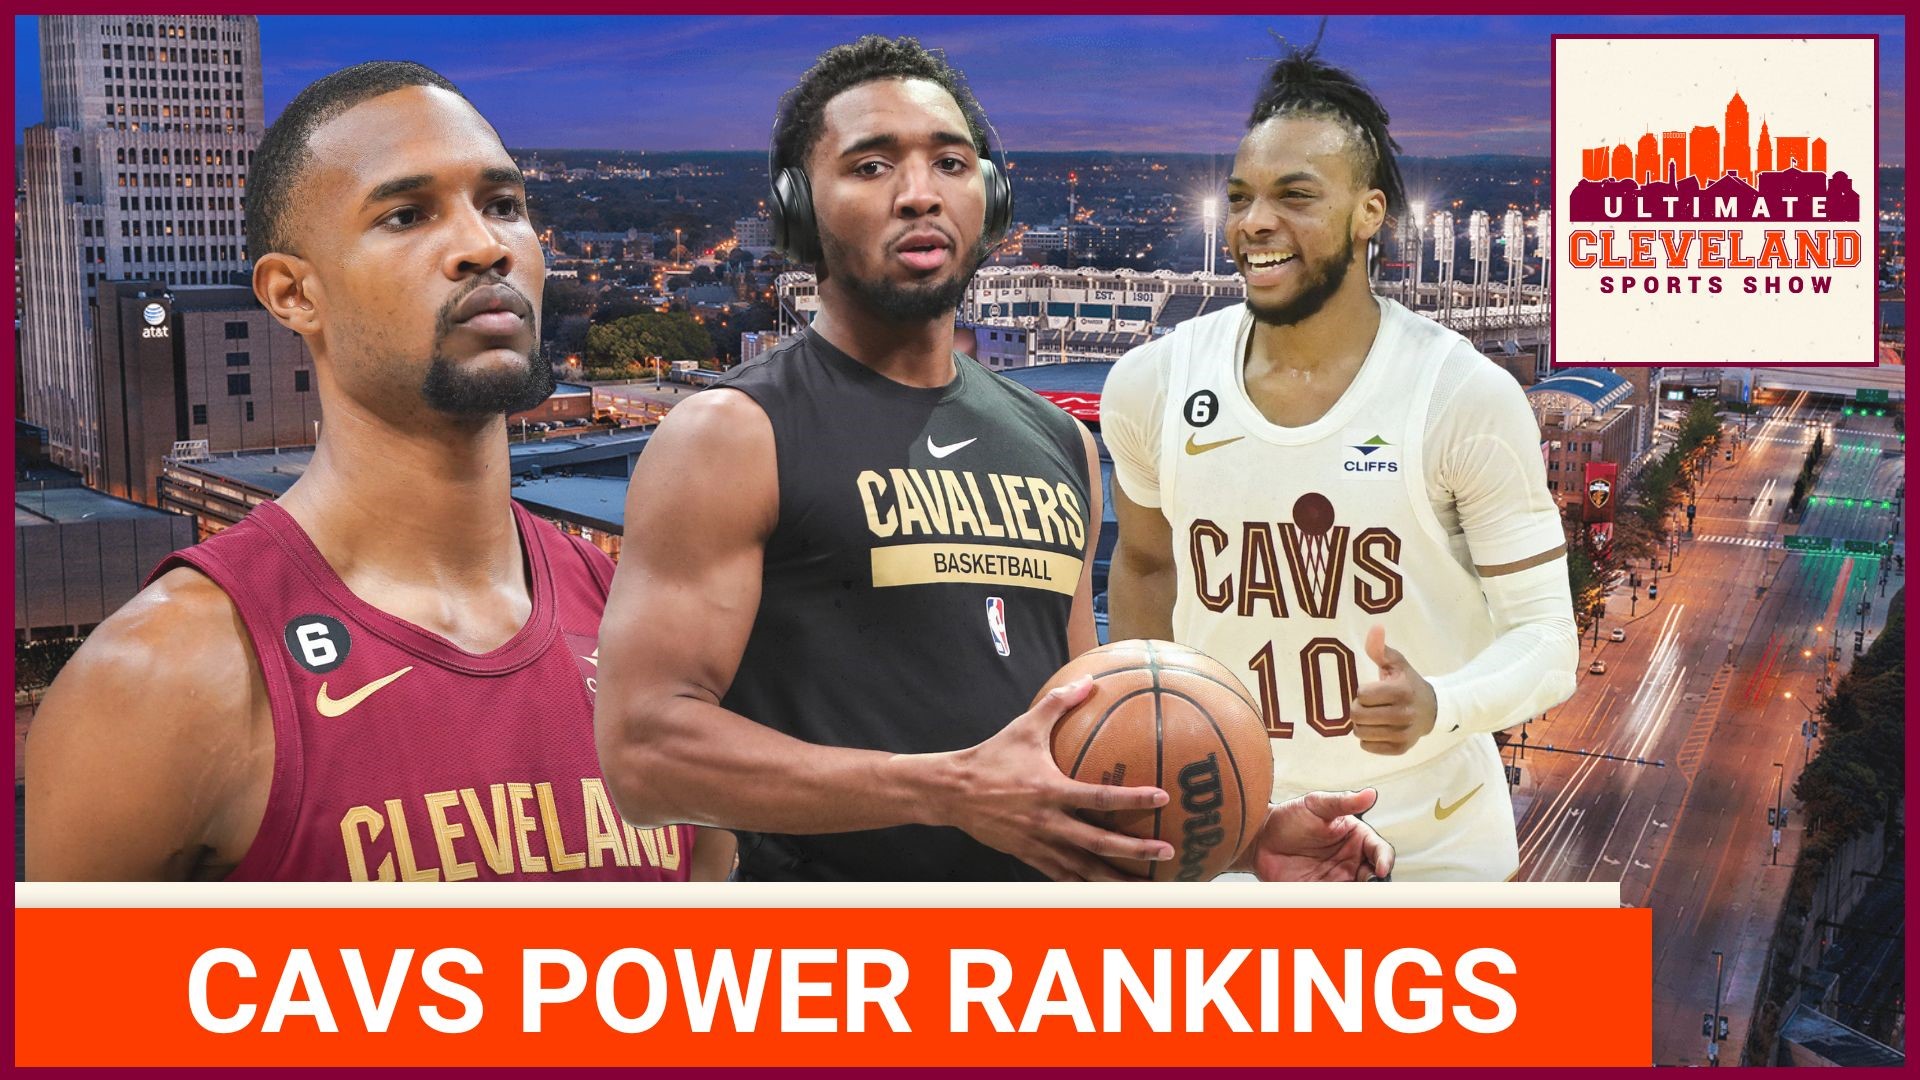 ESPN released their first NBA power rankings and the Cleveland Cavaliers rank 9th for the upcoming season. Too high, too low, or just right?